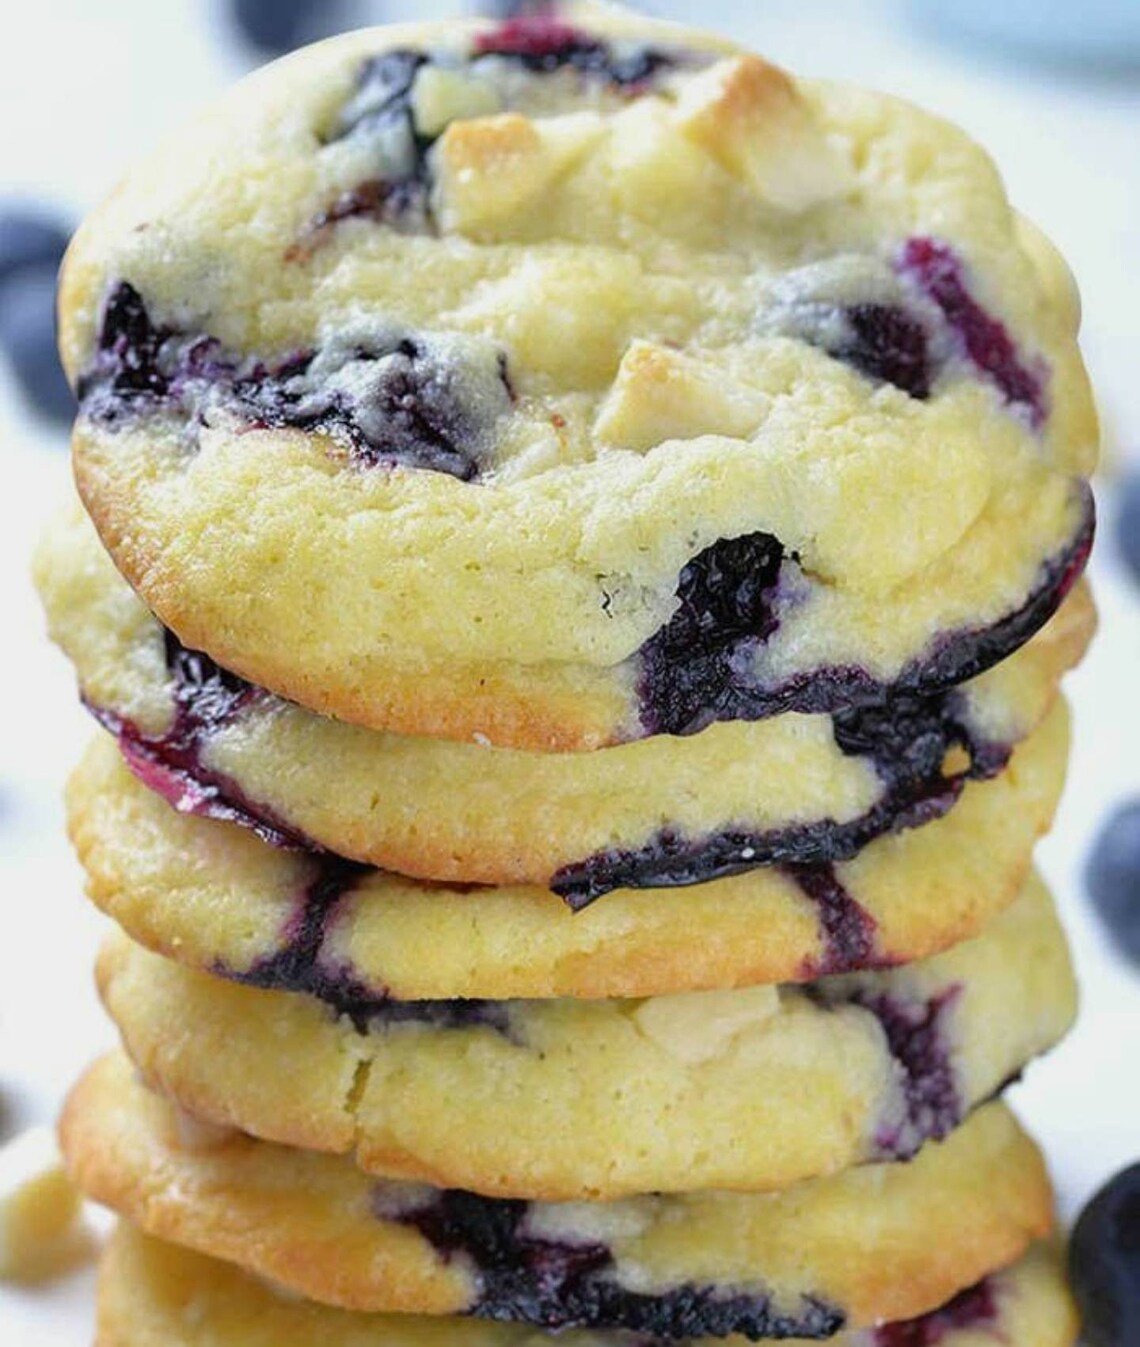 Blueberry or Strawberry filled cookies | Etsy